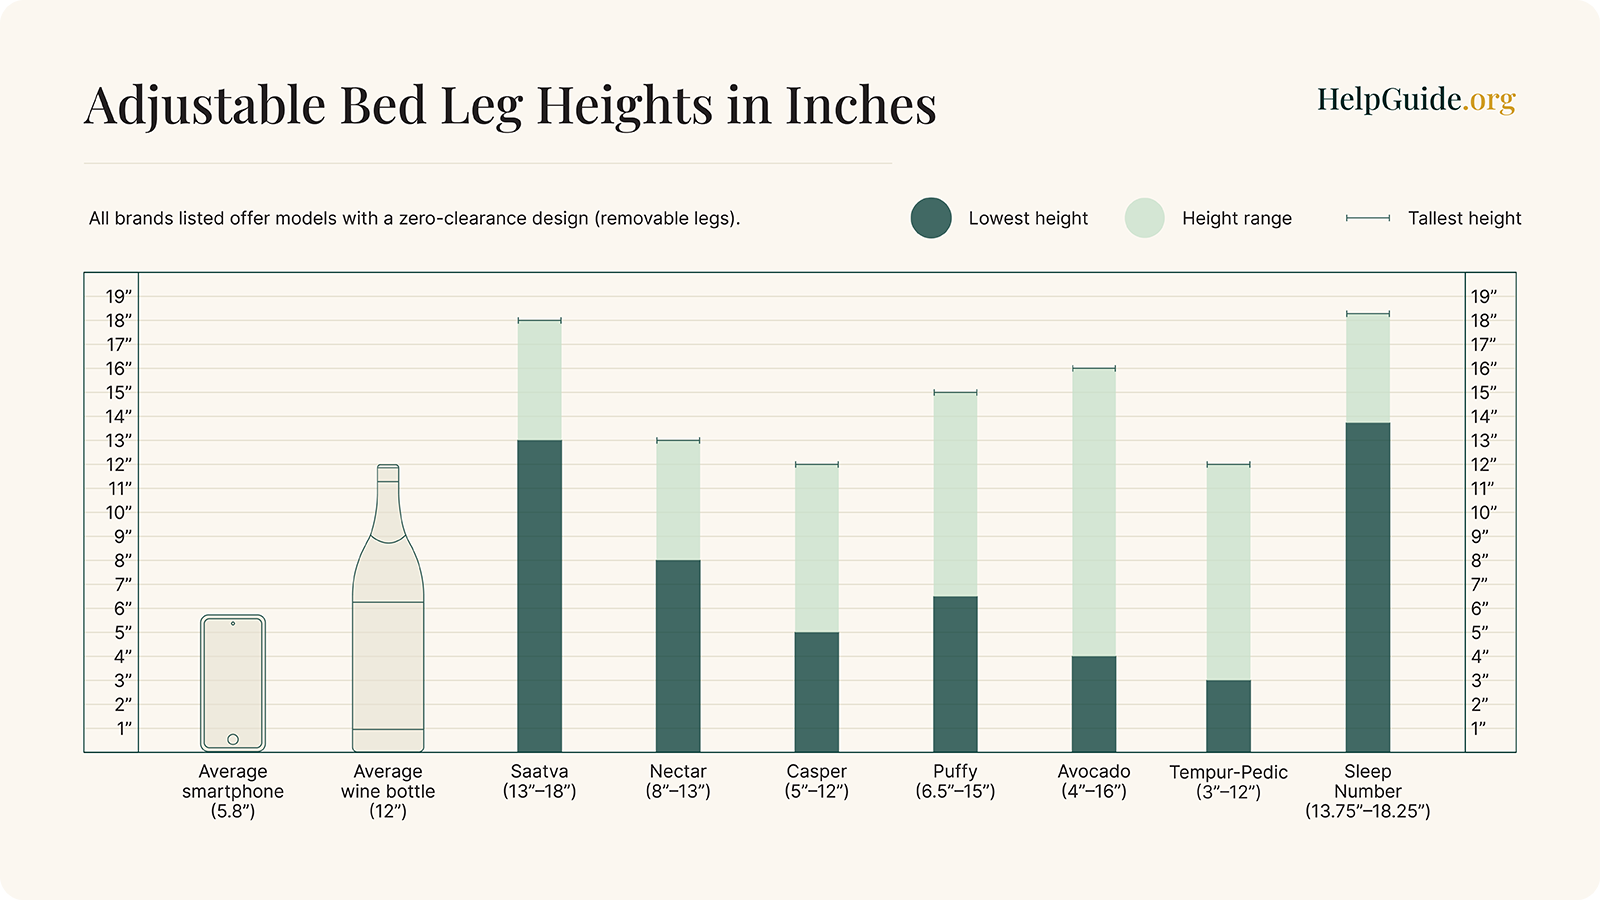 A comparison of adjustable bed brands’ leg heights compared to household items